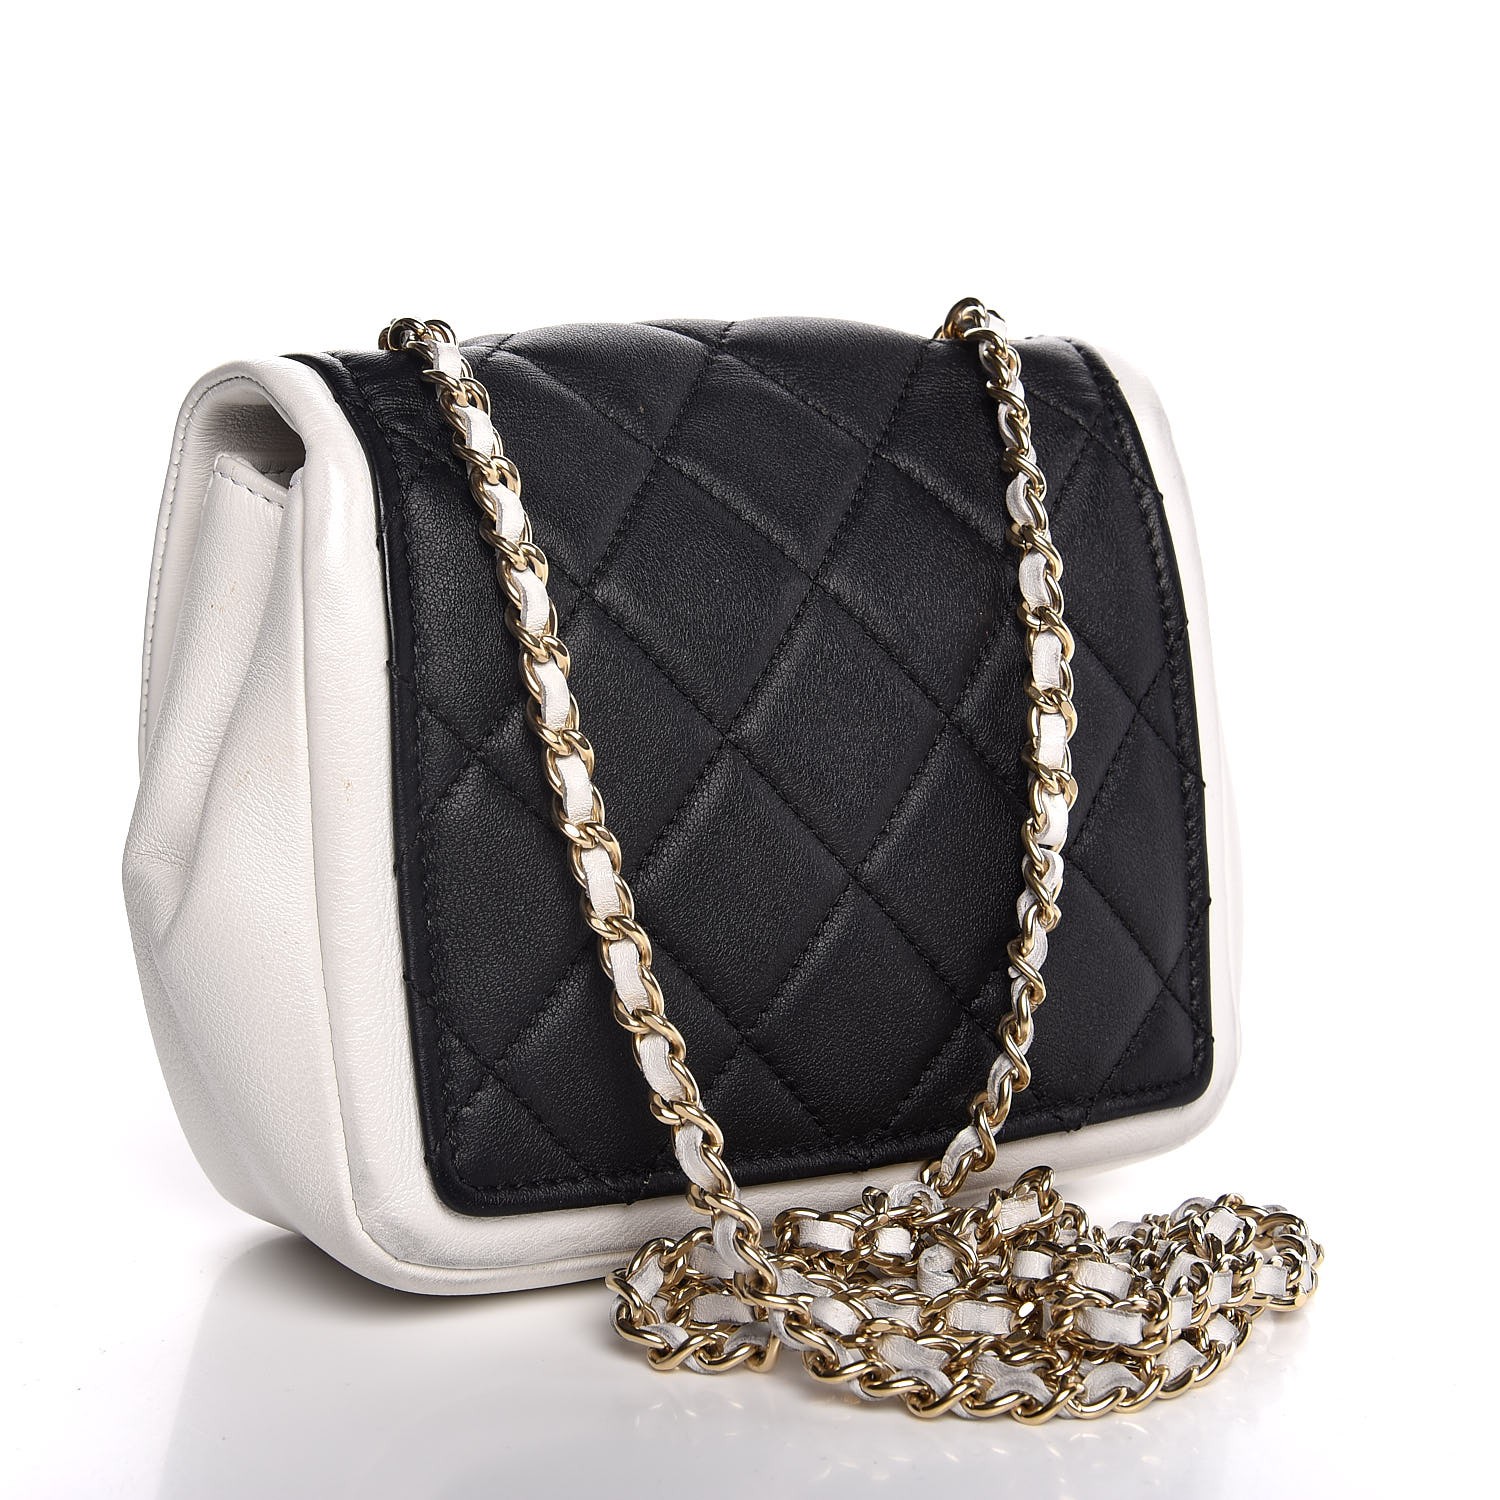 CHANEL Calfskin Quilted Graphic Mini Flap Bag Black White 306986